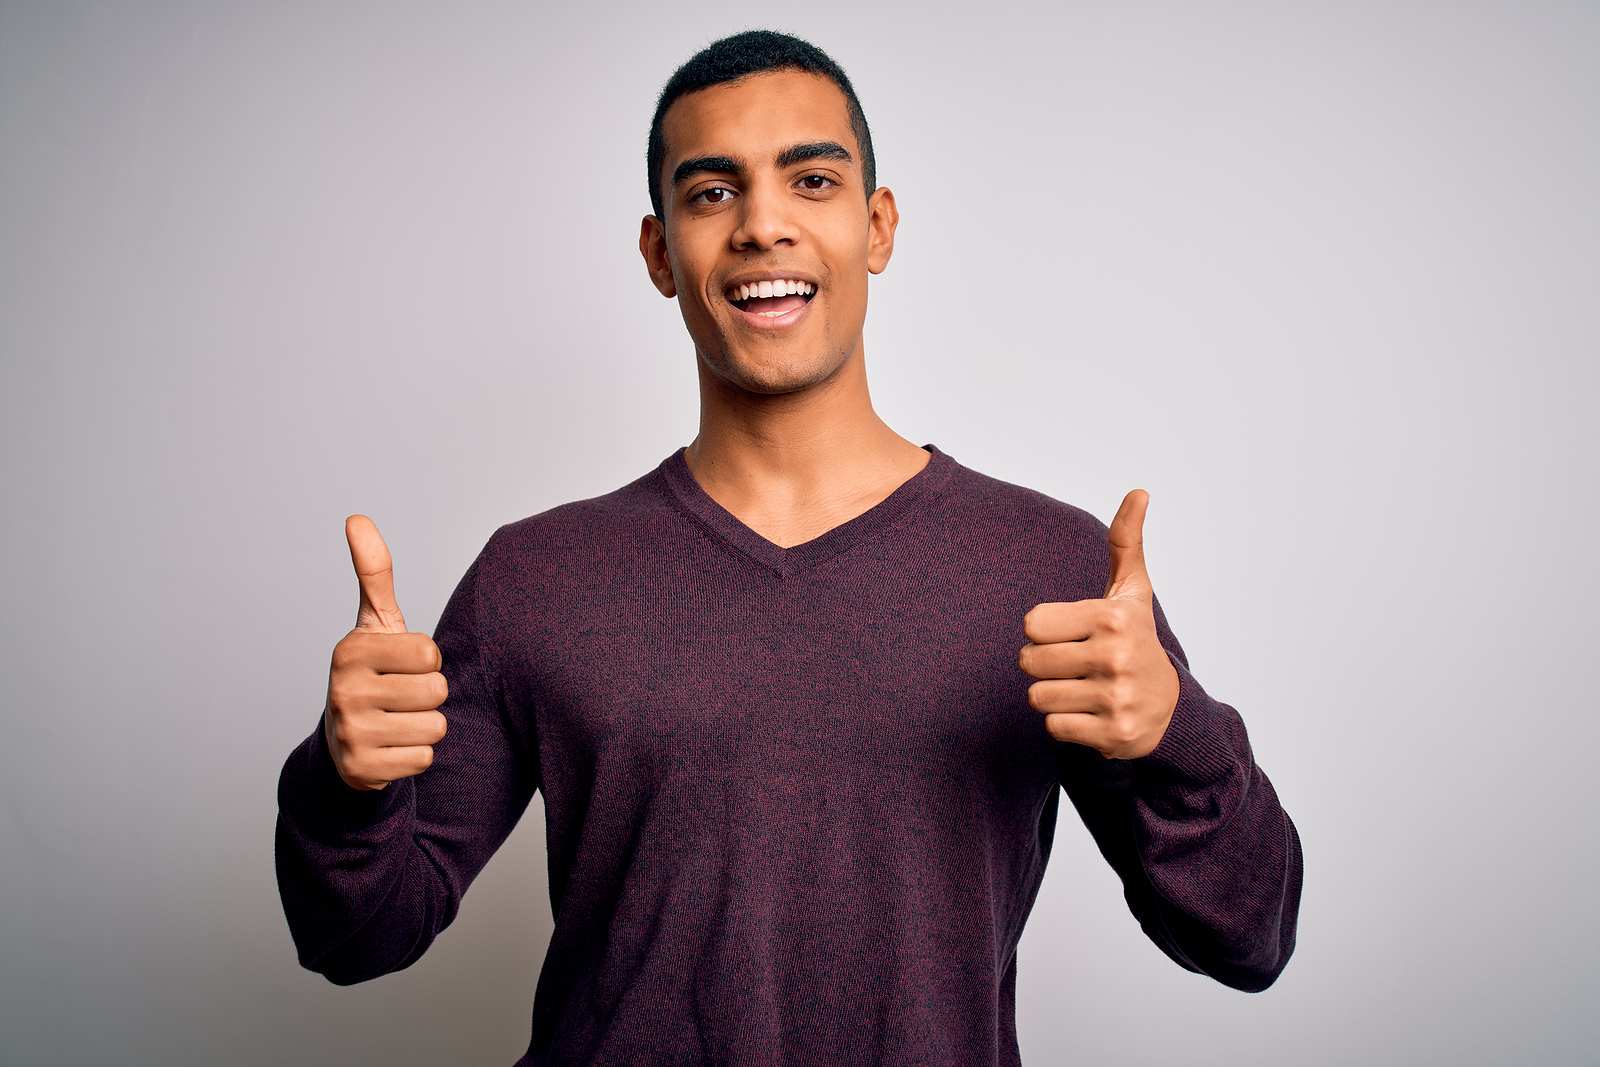 An attractive man smiles and holds his thumbs out in front of a plain background.